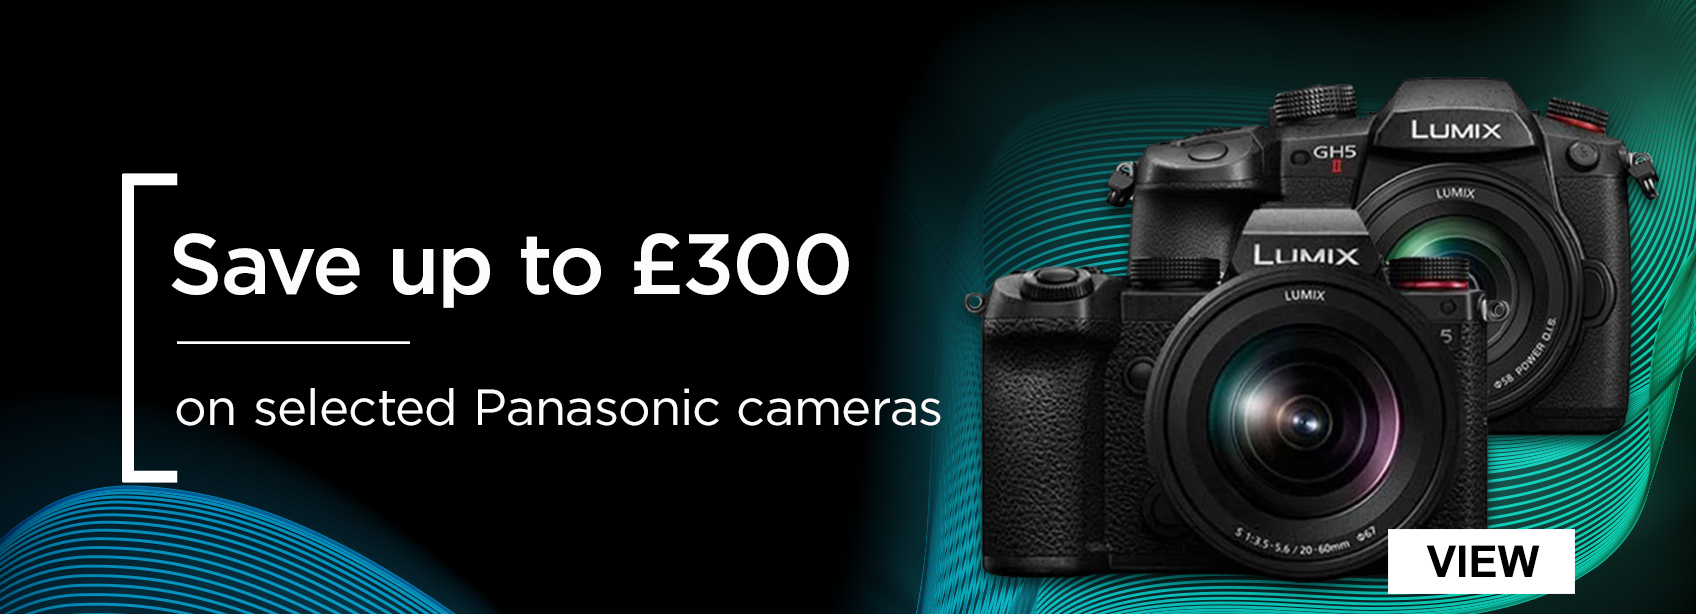 Save up to £300 on selected Panasonic cameras